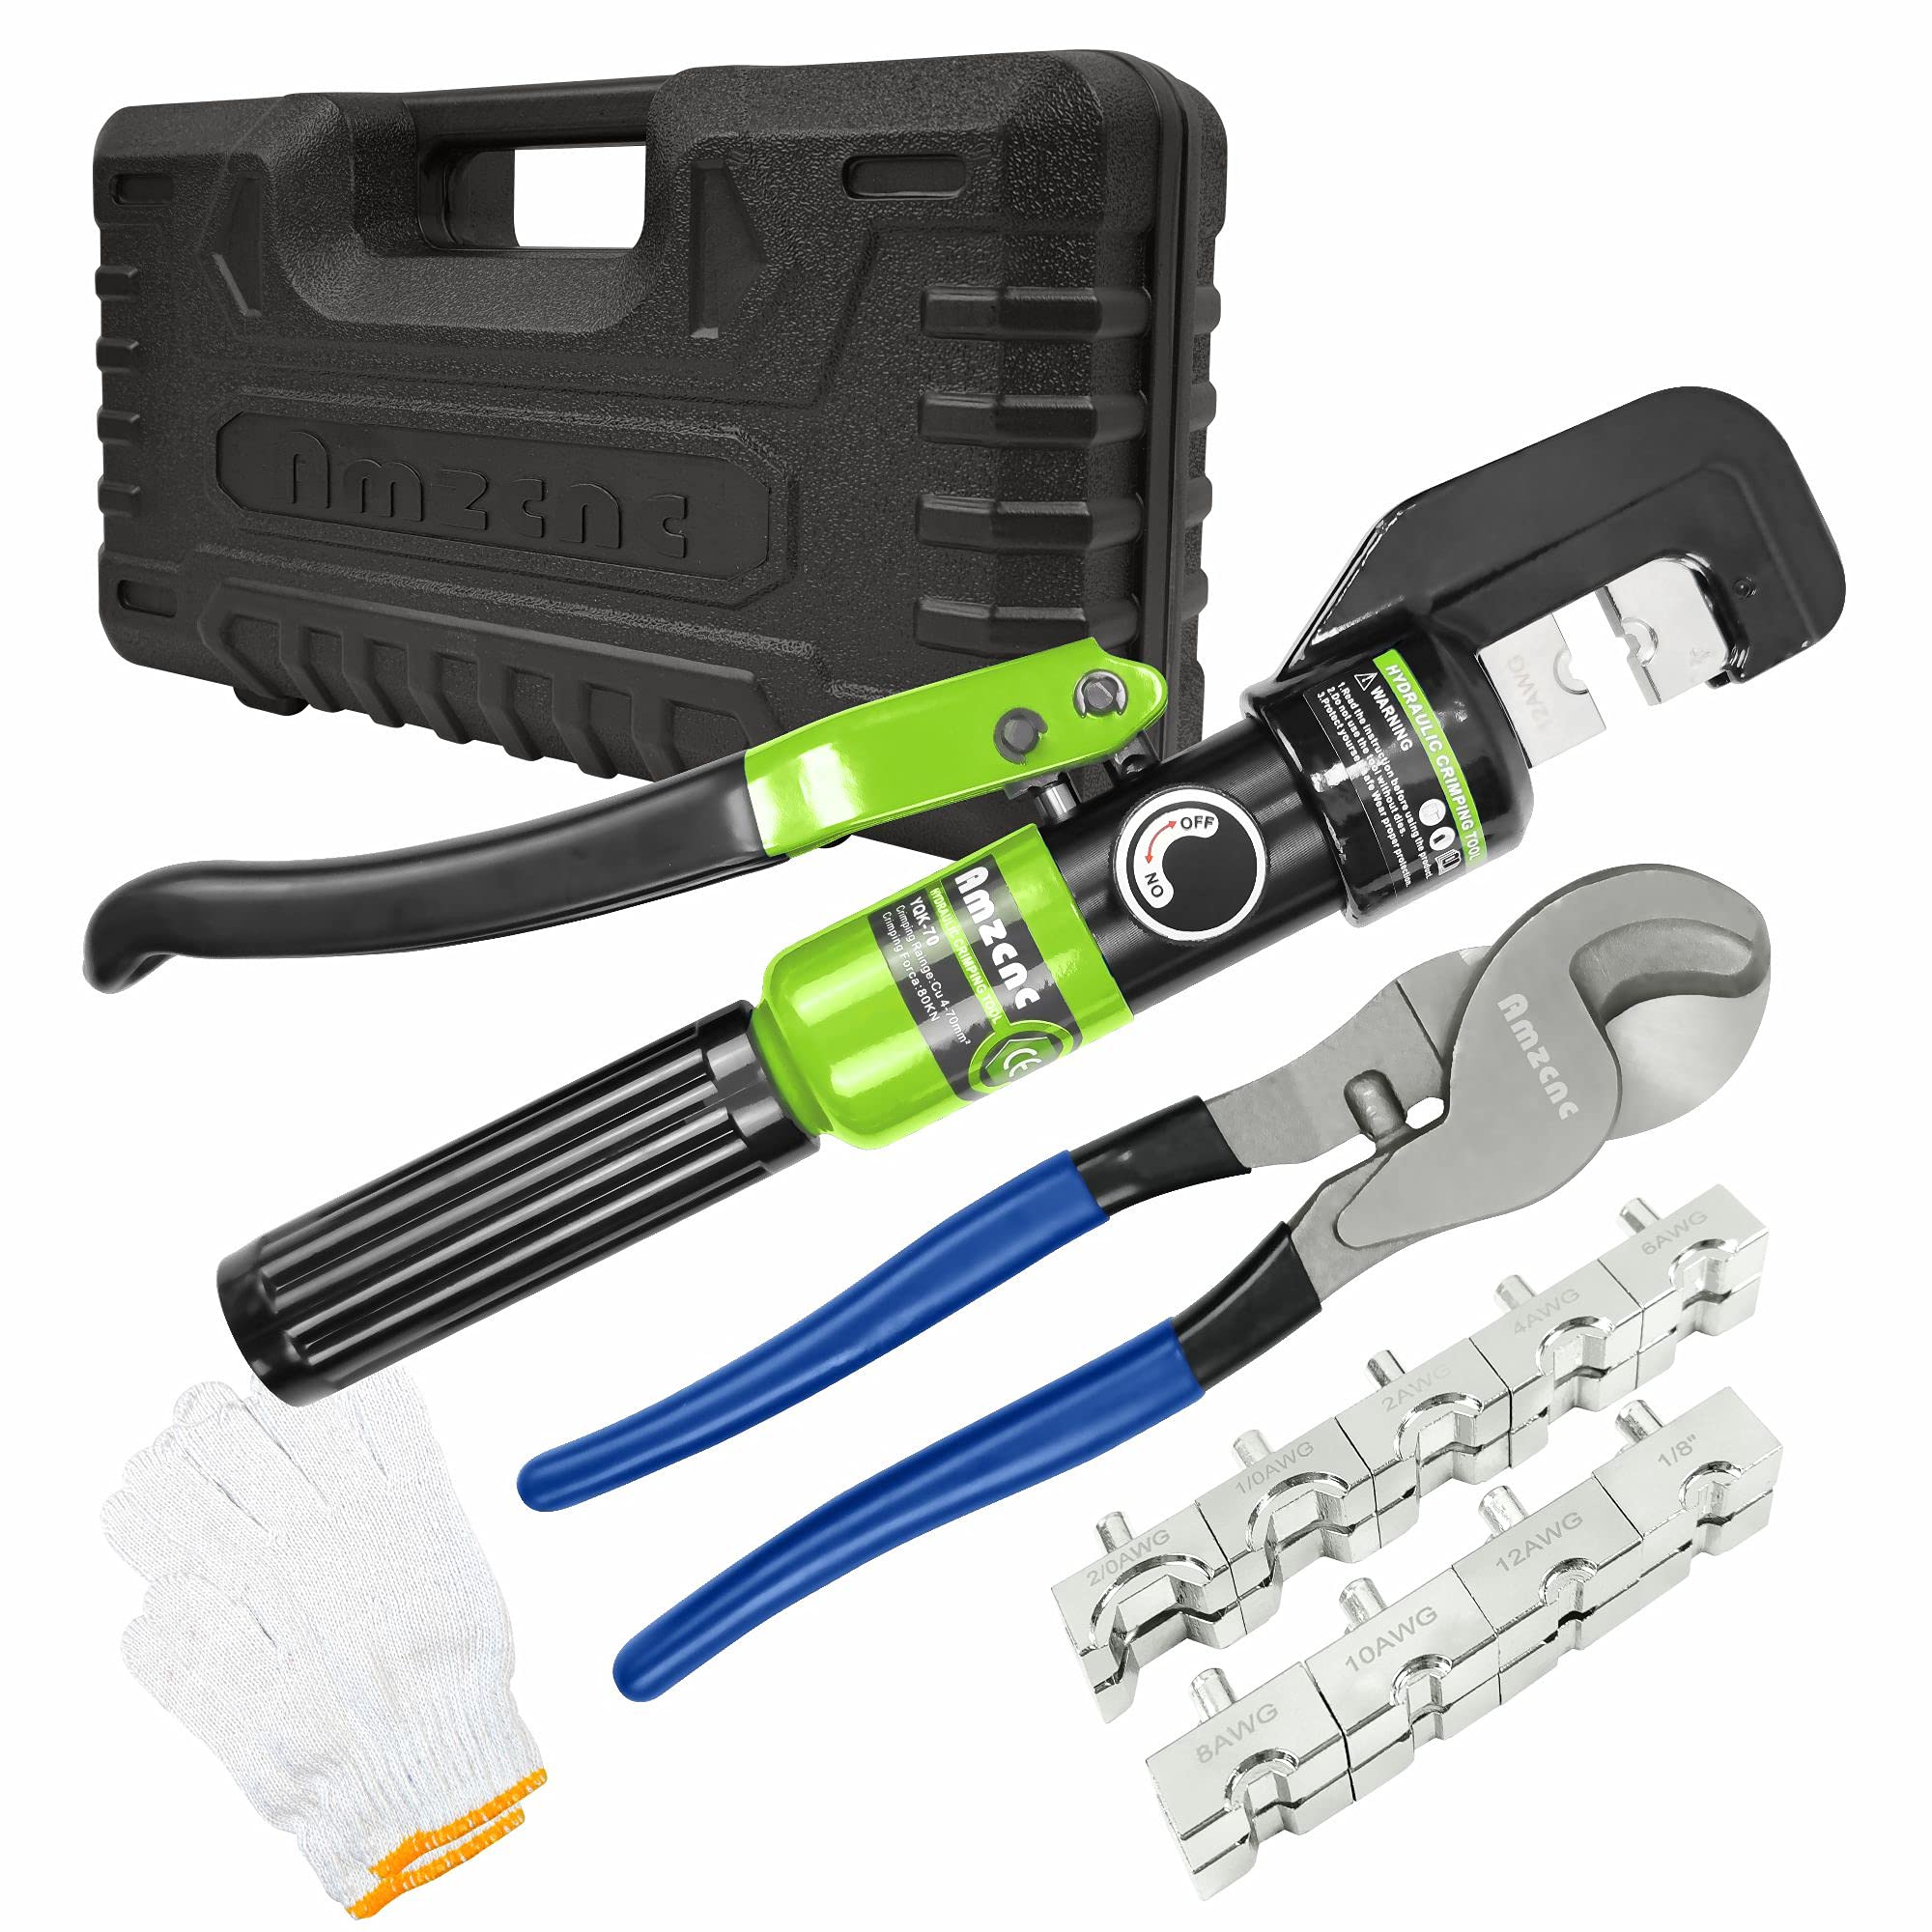 AMZCNC Hydraulic Cable Lug Crimper 8 US TON 12 AWG to 00 20 Electrical Terminal Cable Wire Tool Kit with 9 Die Crimping T